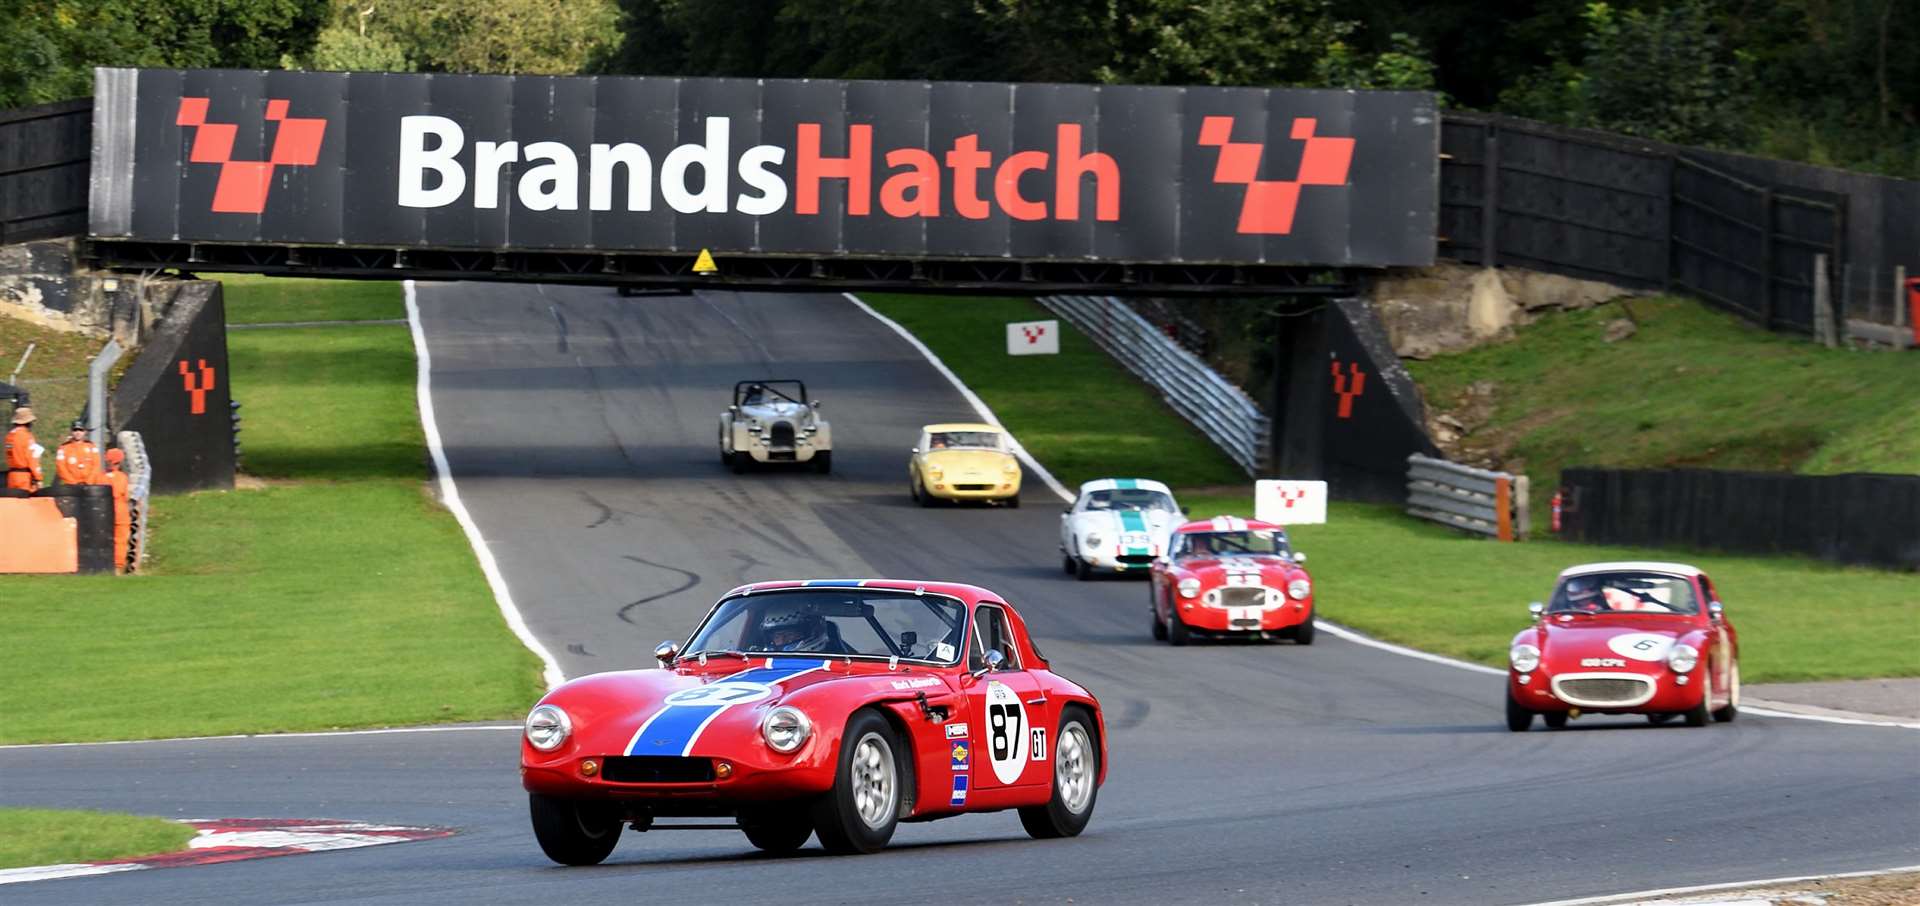 The accident happened at Brands Hatch. Picture: Simon Hildrew